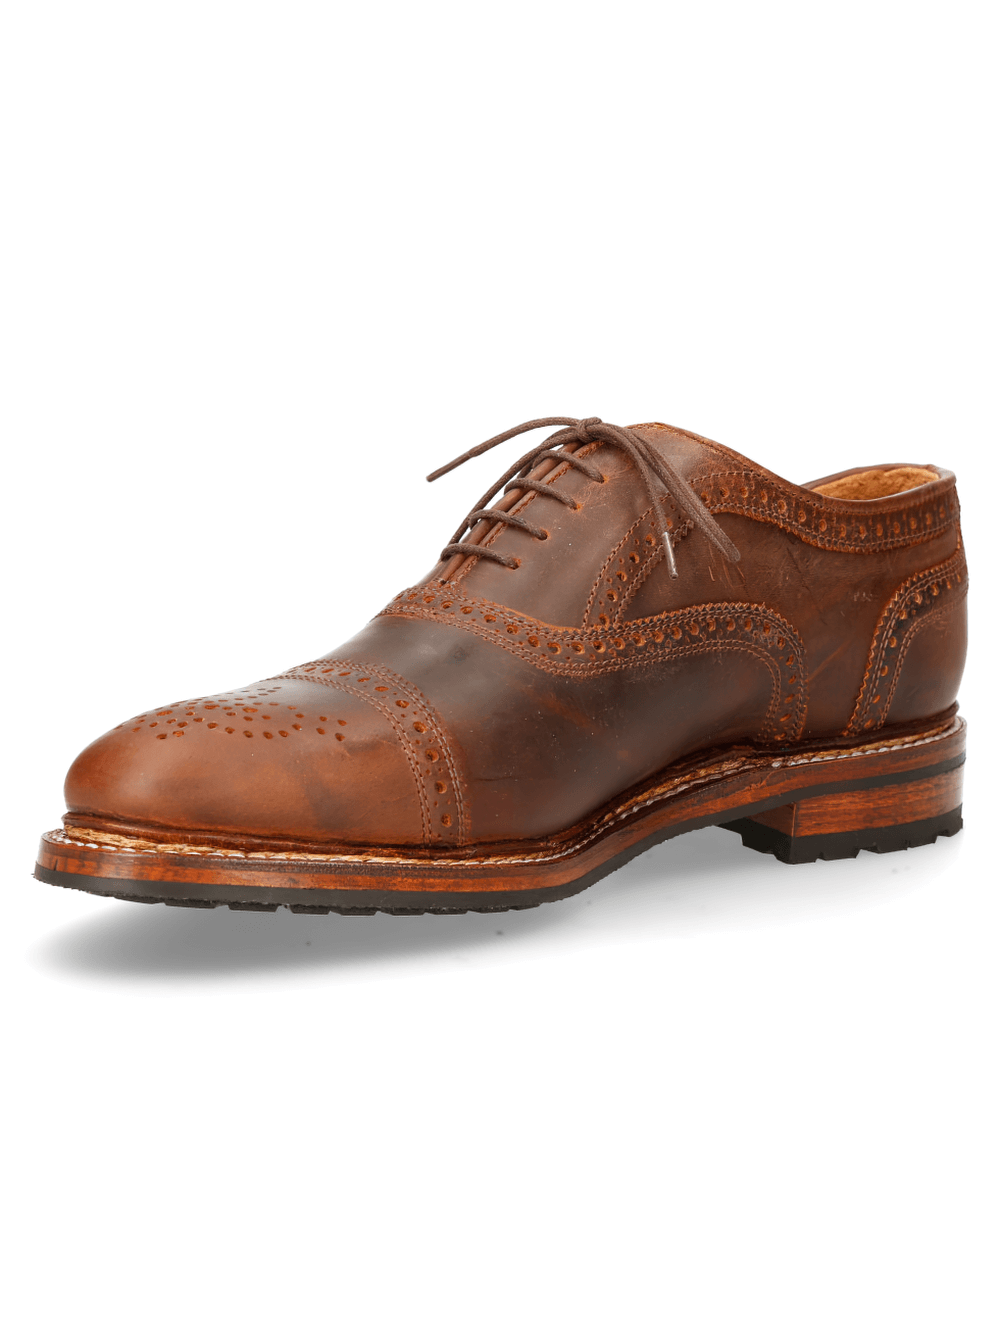 NEW ROCK Stylish Leather Tan Wingtip Lace-Up Derby Shoes